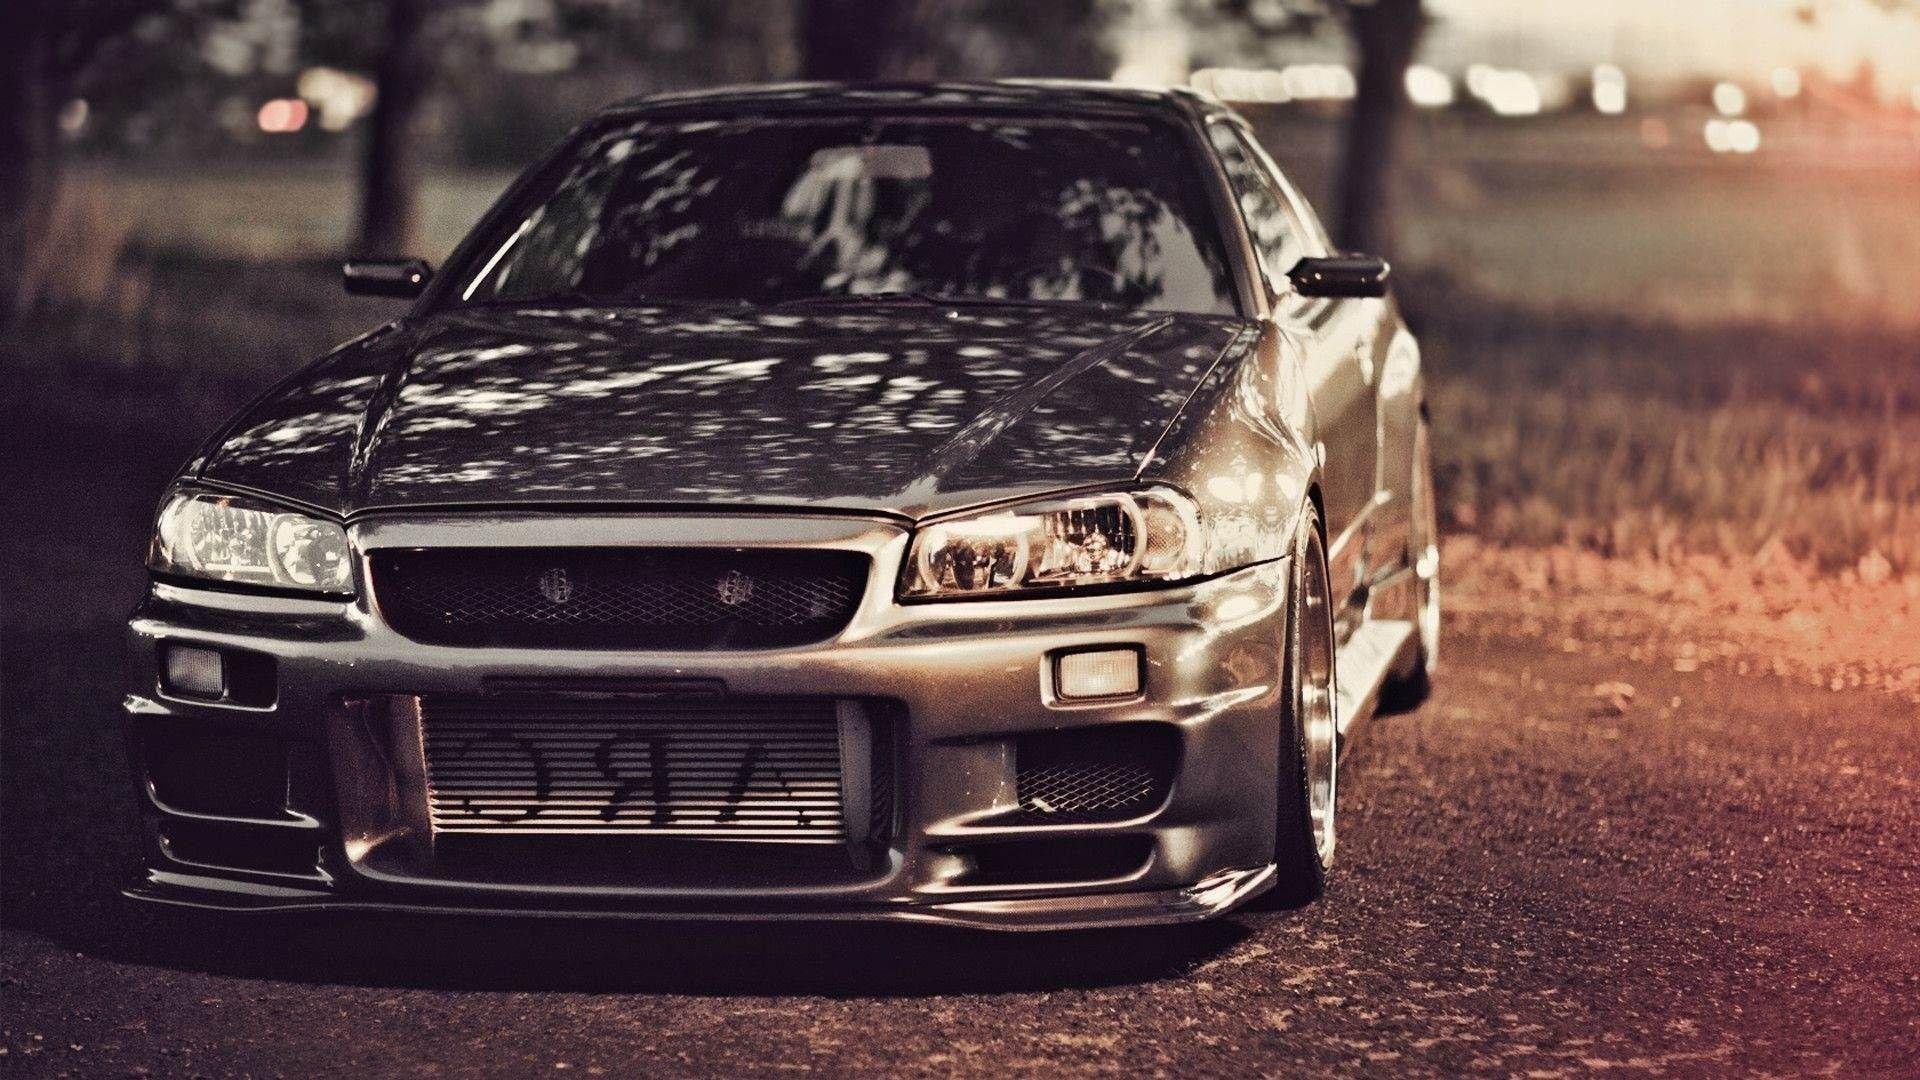 Nissan GTR R34 Wallpapers - Top Free Nissan GTR R34 Backgrounds